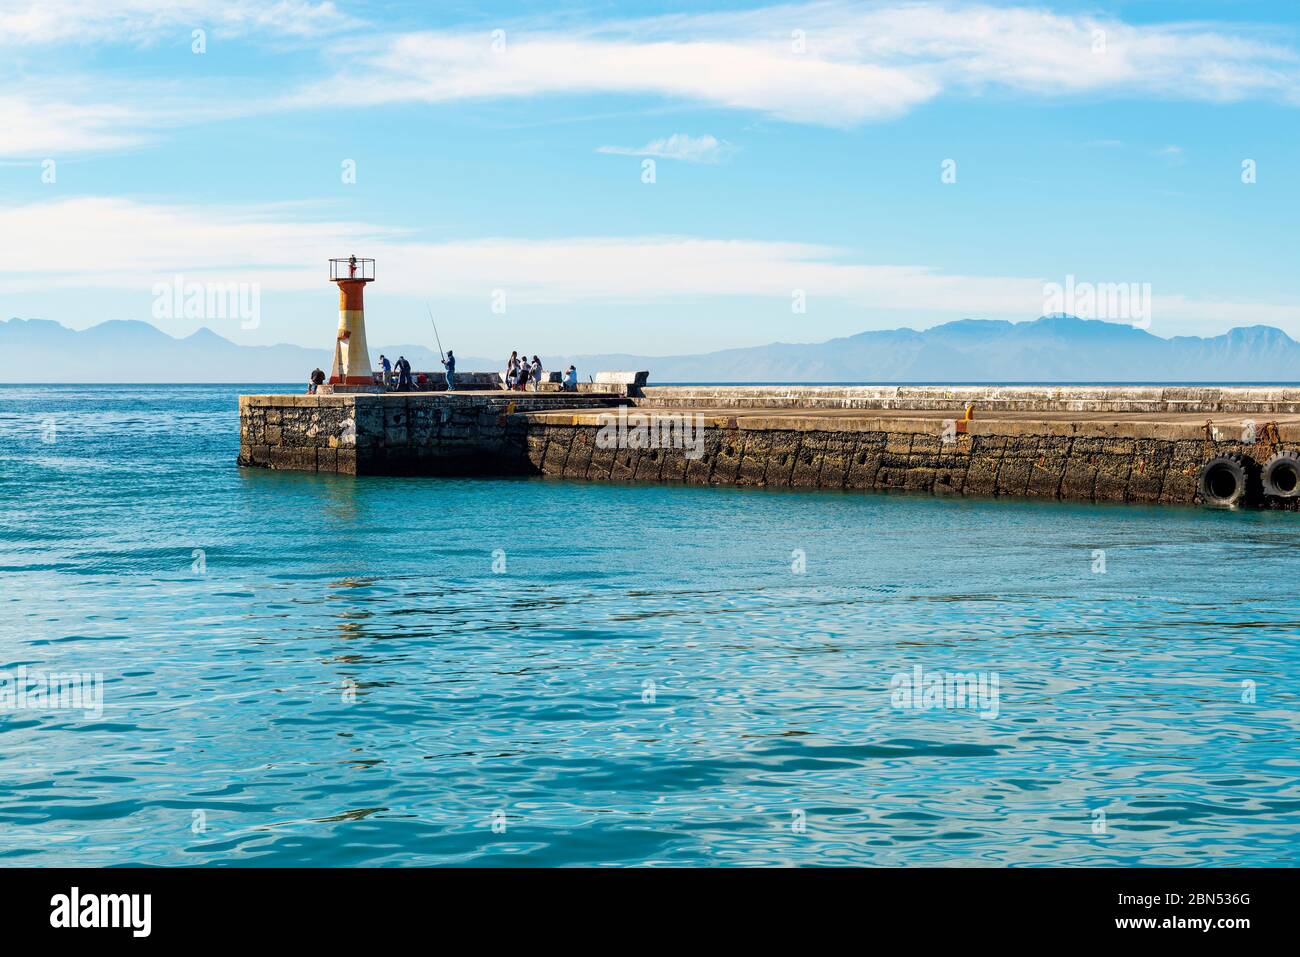 Fishermen and people walking by the lighthouse of Kalk Bay harbor near Cape Town, South Africa. Stock Photo